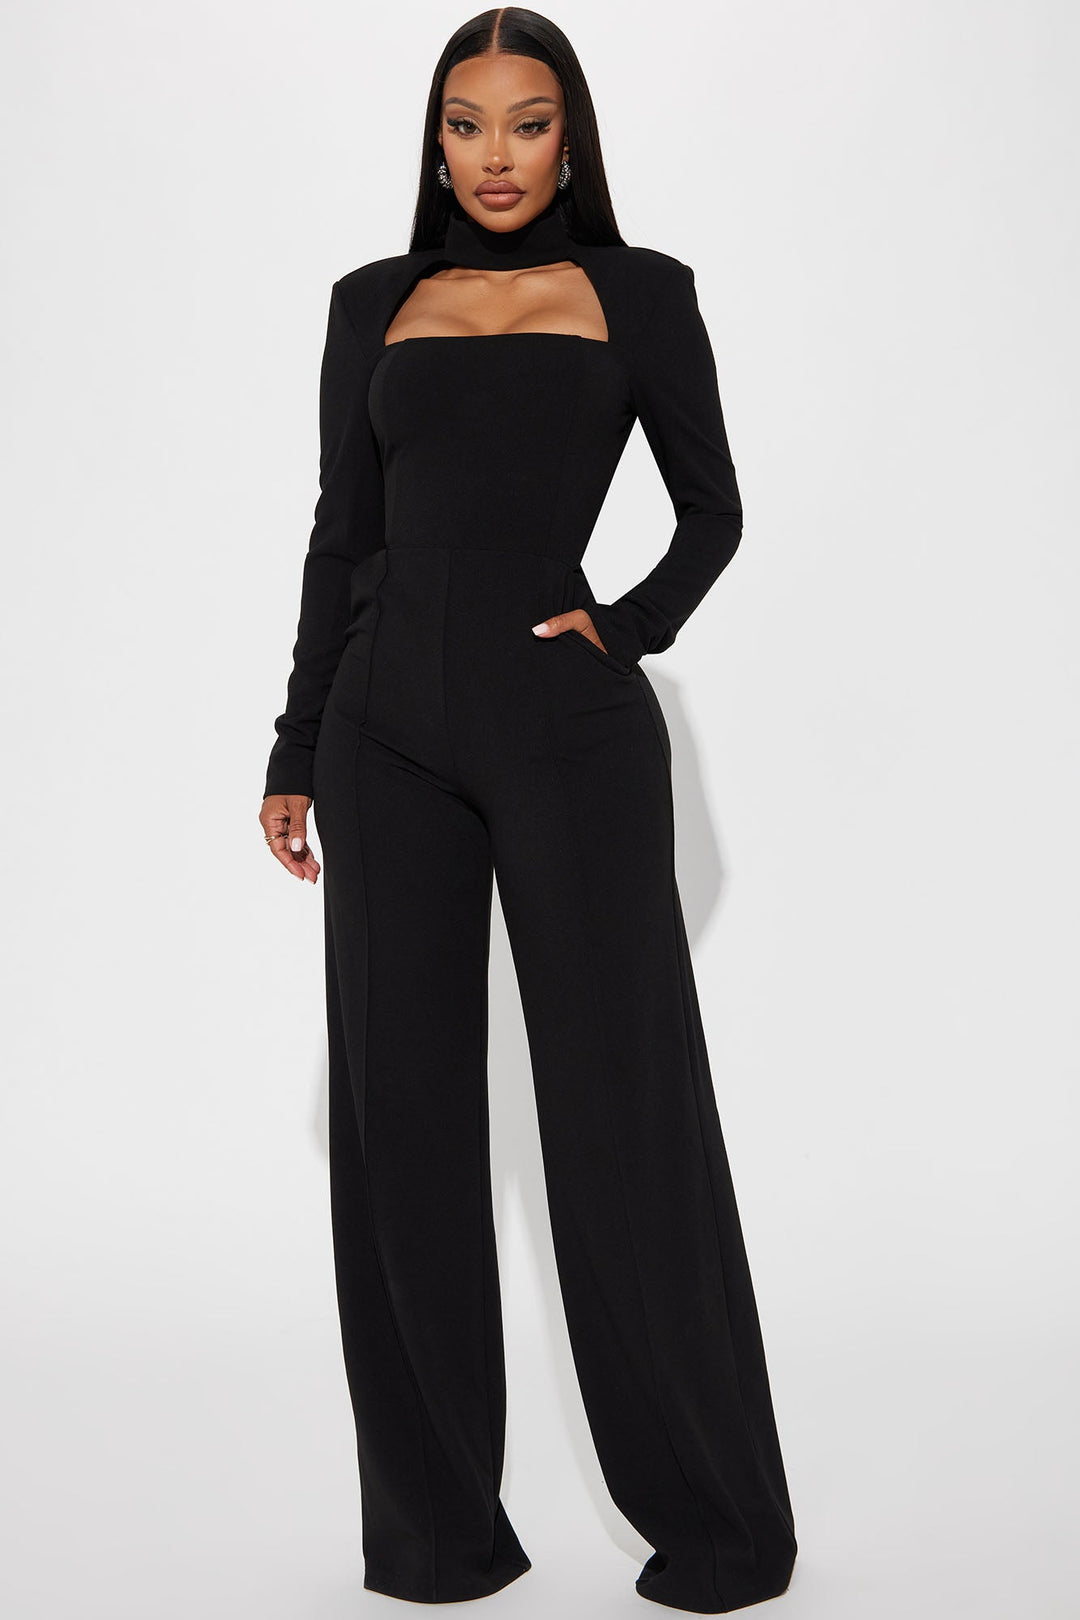 BlackTree To You Jumpsuit